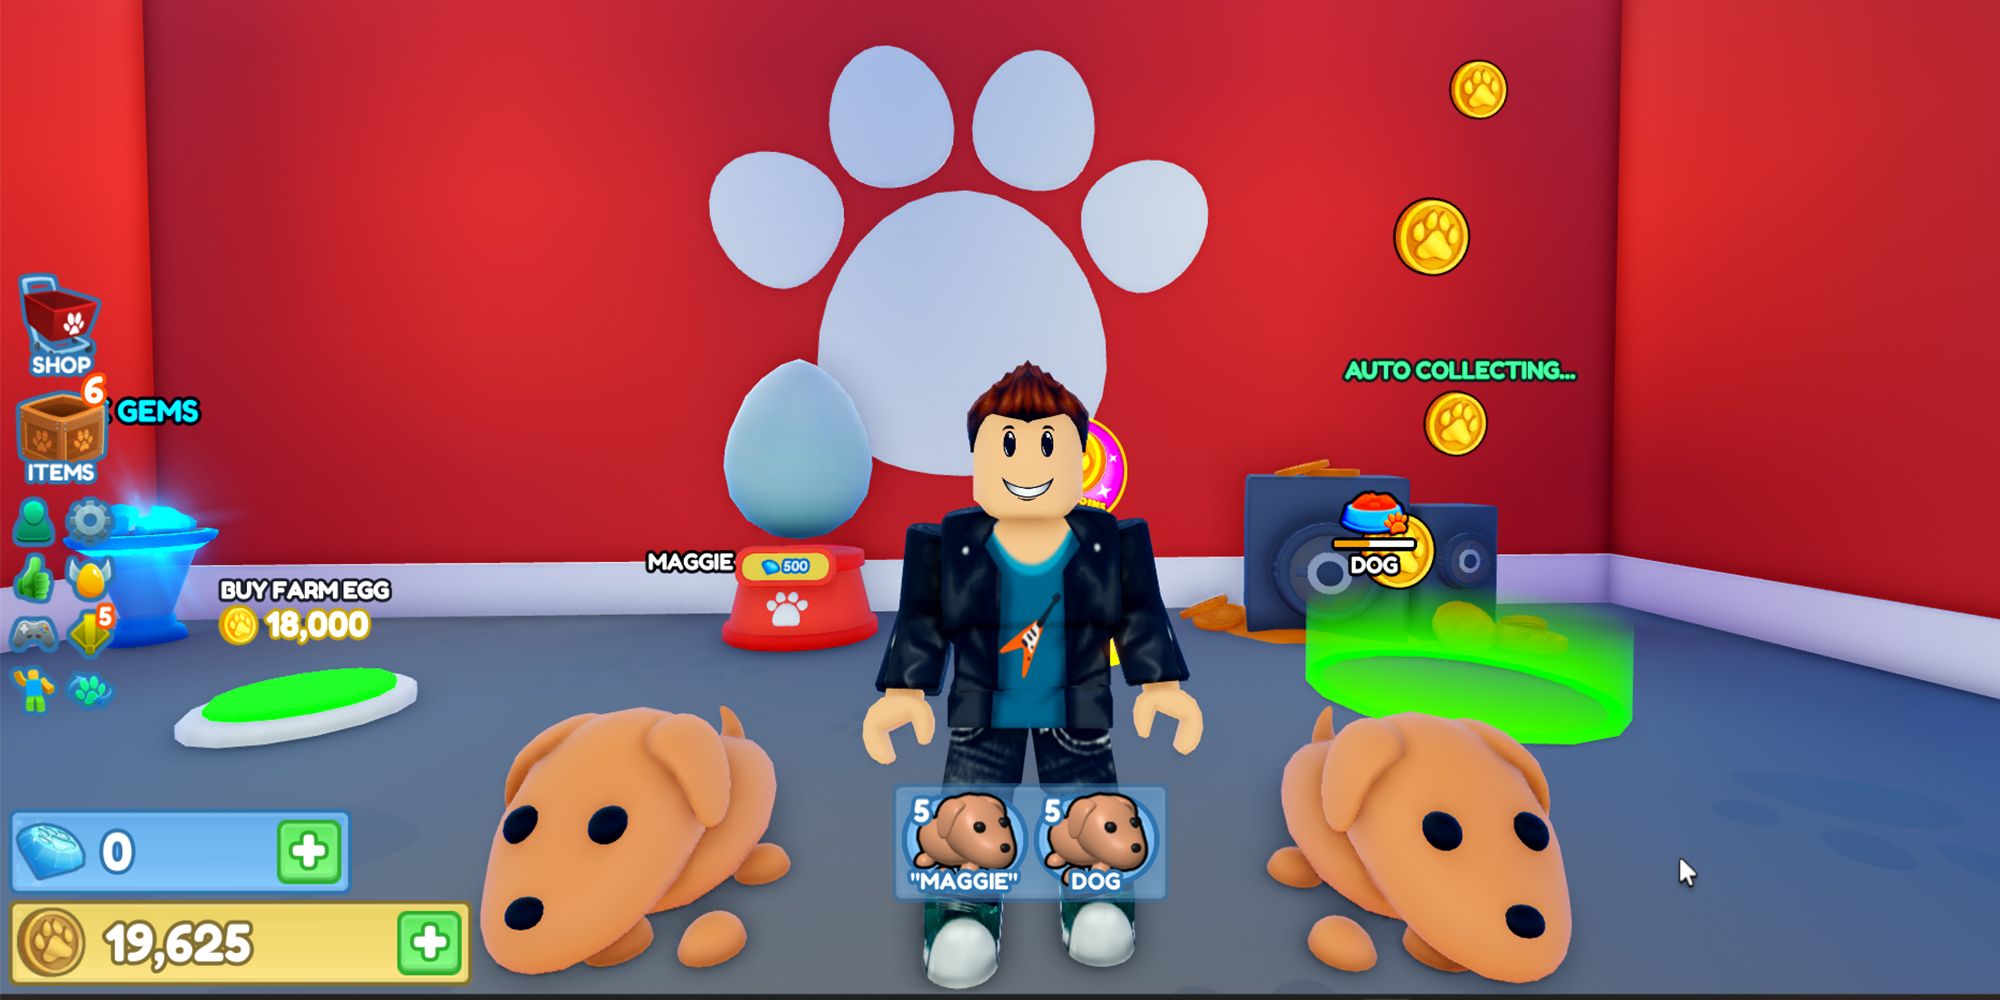 A Roblox character poses with his two dogs in Pet Mansion Tycoon.